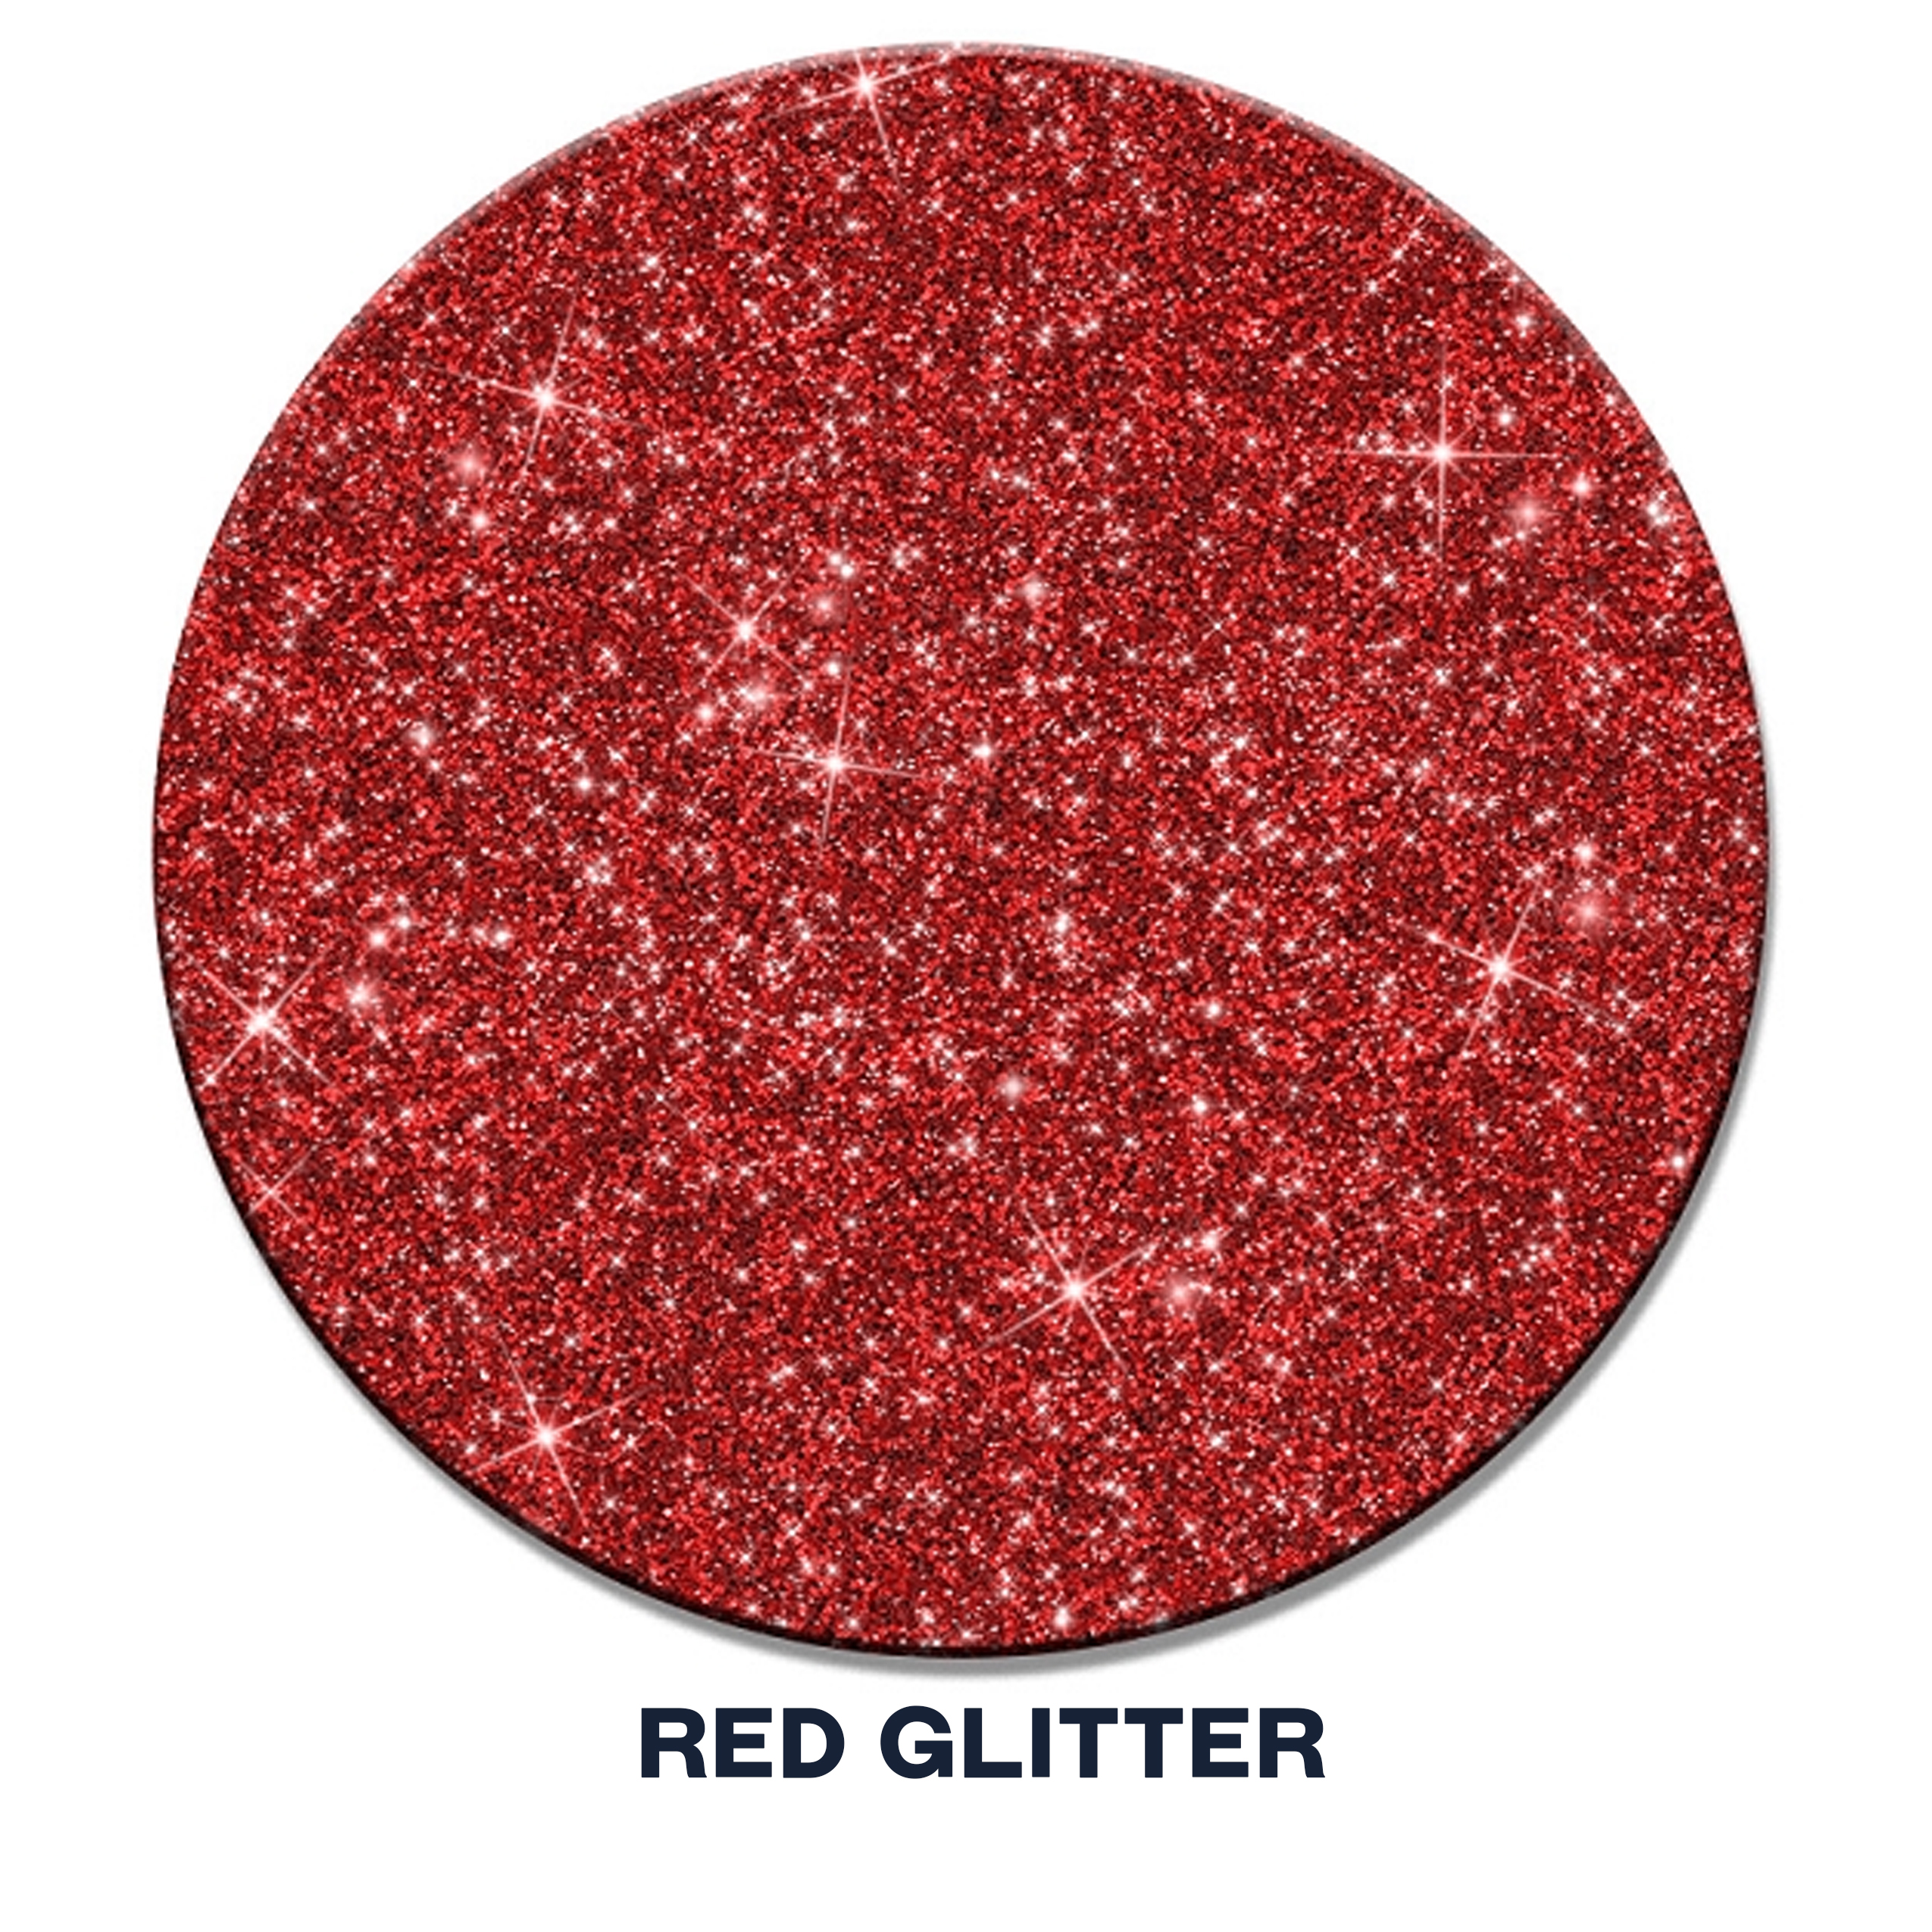 Heat Transfer Vinyl Glitter Red KKs Printing and Personalize Items